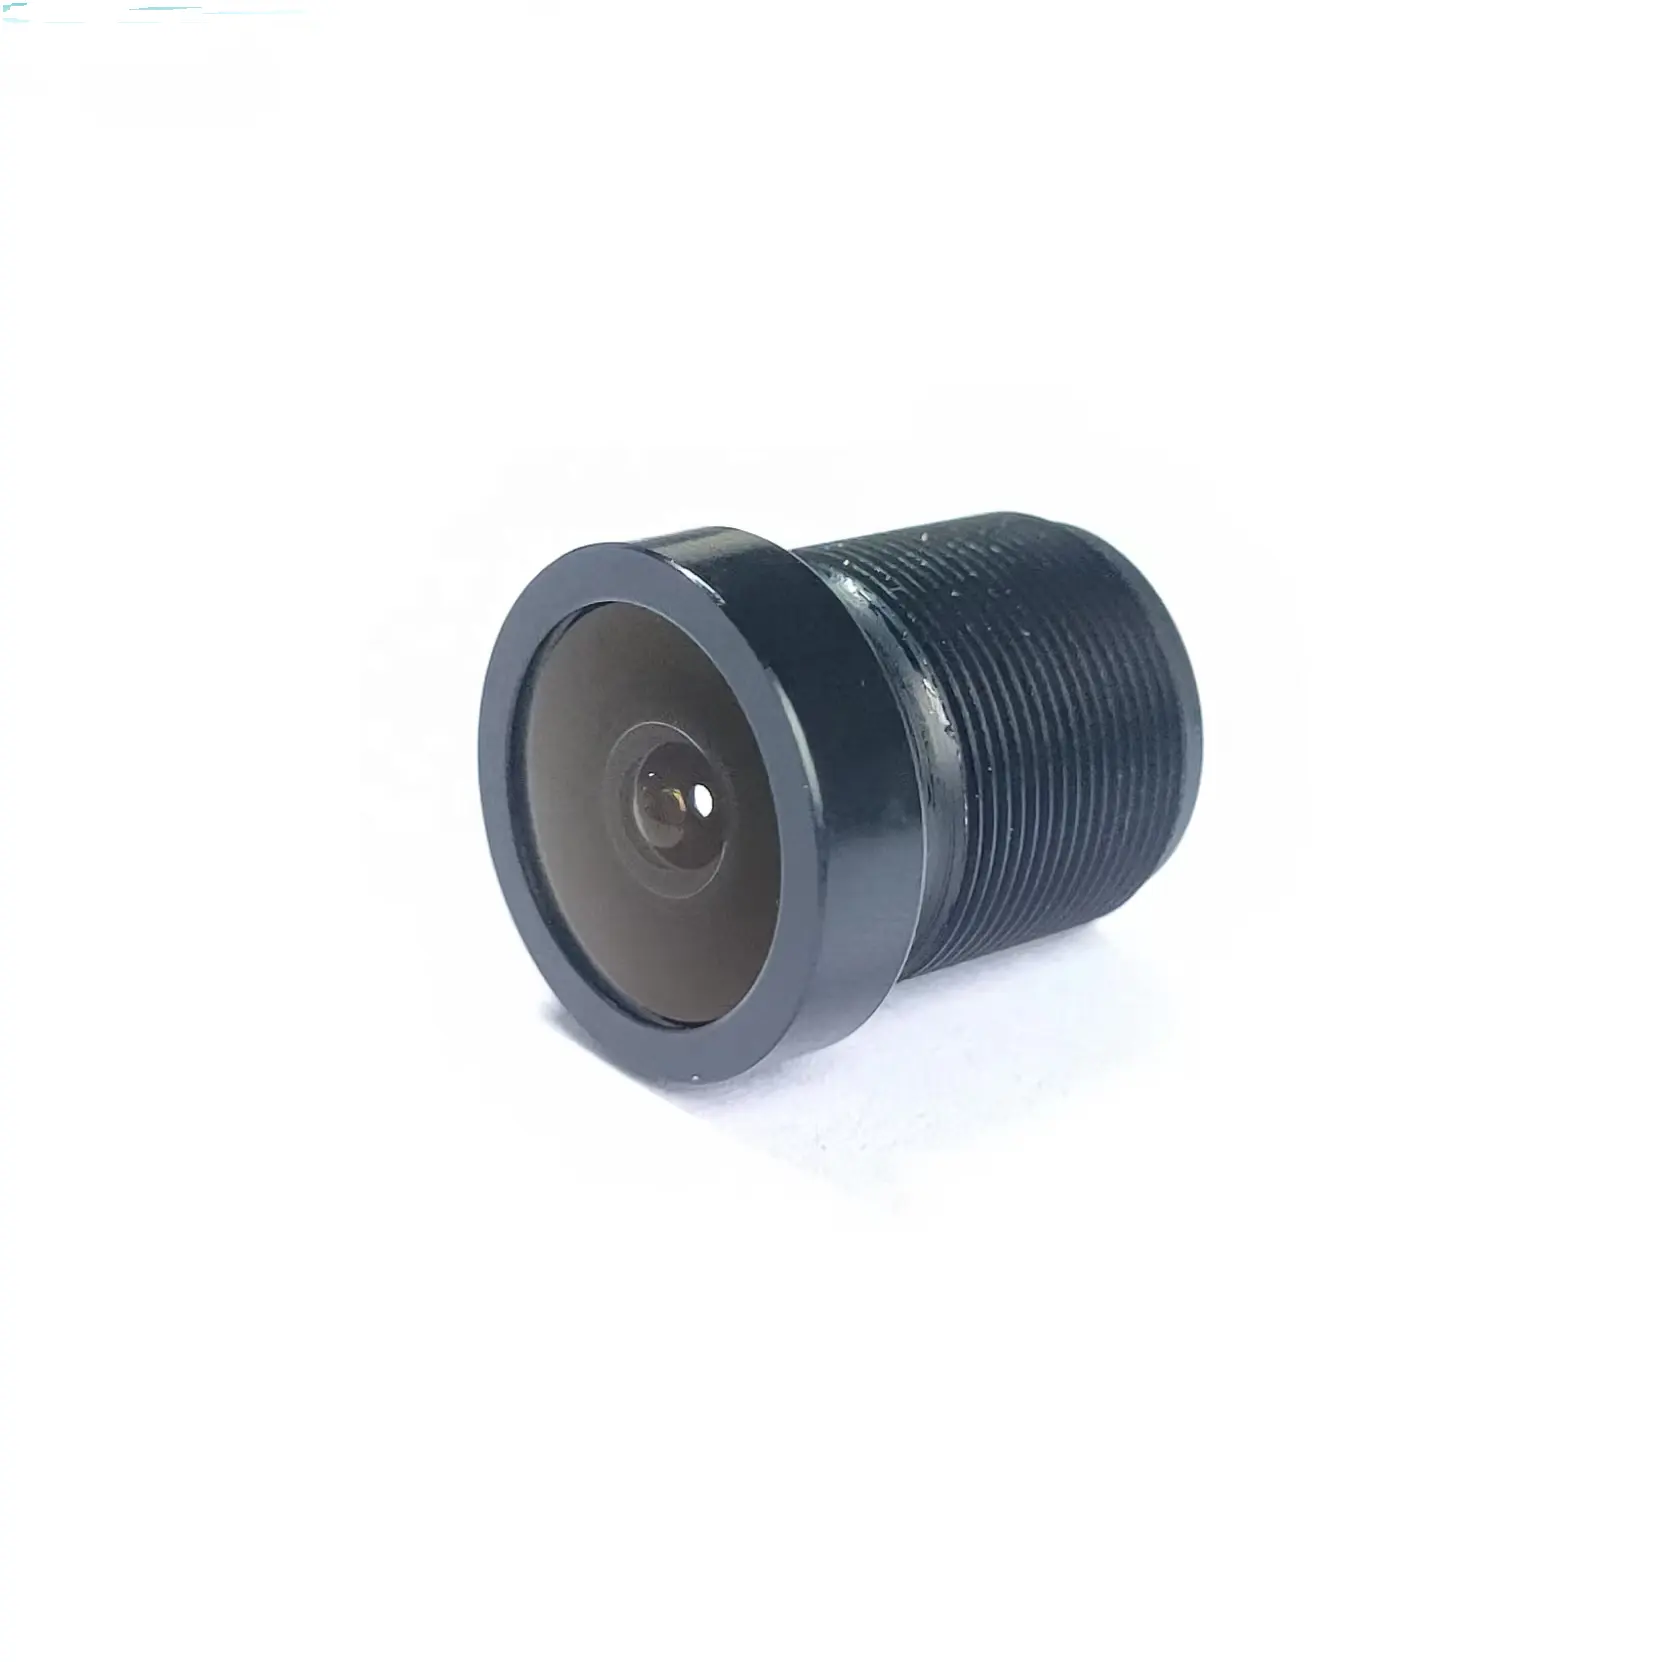 2MP CCTV lens accessories 1/4 ''m12 F2.3 mm focal length 2.1 viewing angle 122 degrees Ford car surveillance lens